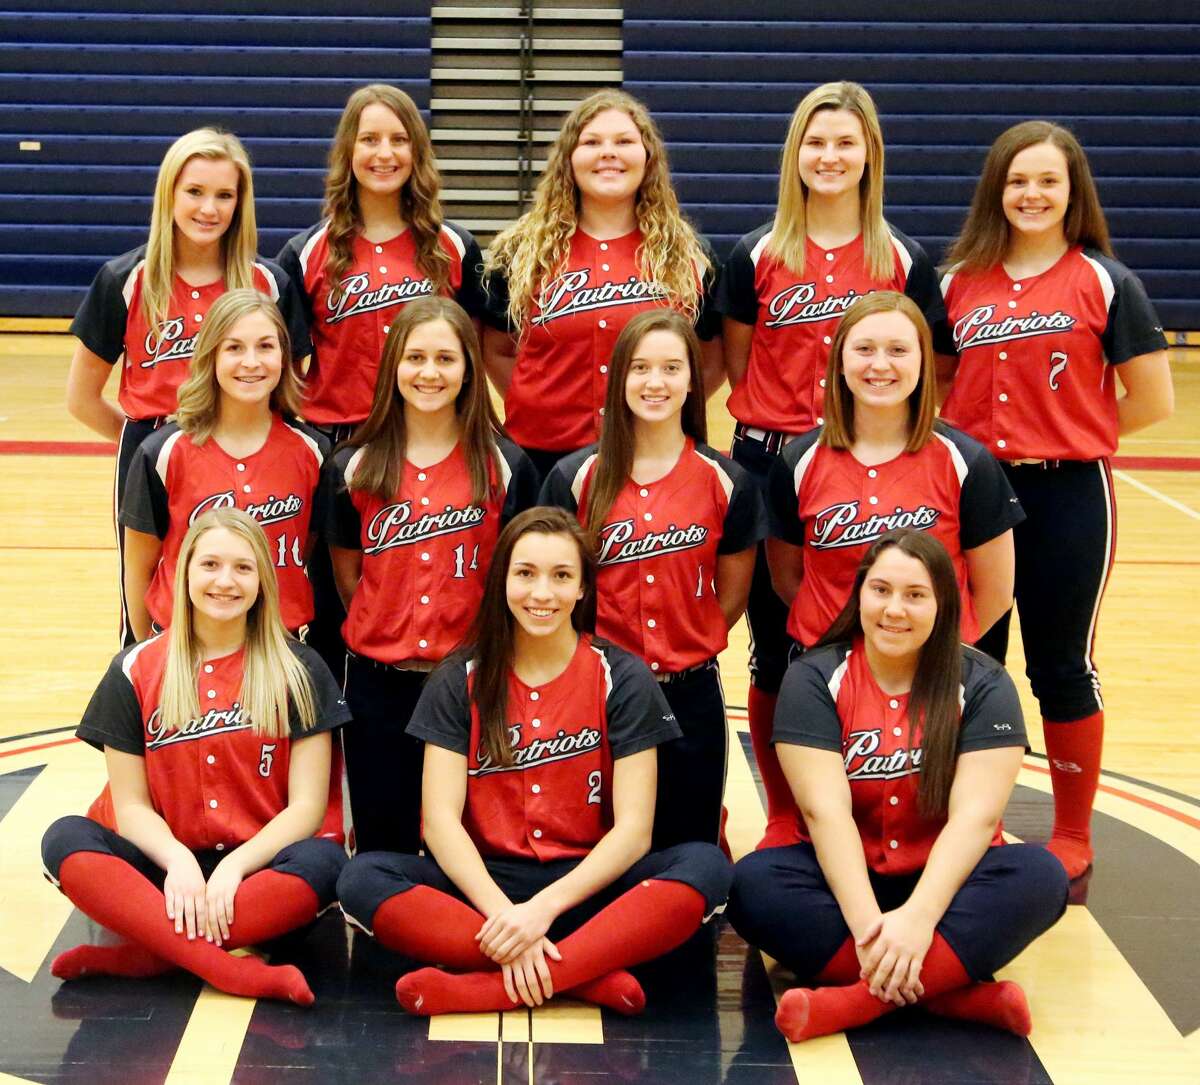 Members of the Unionville-Sebewaing Area varsity softball team are (front row from left) Nichole Schember, Rylee Zimmer and Delanie Pavlichek (middle row) Grace Williamson, Macy Reinhardt, Maci Montgomery and Brynn Polega (back row) Bailey Sy, Chelsea Bolzman, Carissa Dinsmoore, Danielle Harper and Laci Harris. USA Softball  1 Maci Montgomery 2 Rylee Zimmer 3 Chelsea Bolzman 4 Danielle Harper 5 Nichole Schember 6 Bailey Sy 7 Laci Harris 9 Delanie Pavlichek  10 Grace Williamson 13 Carissa Dinsmoore 14 Macy Reinhardt 22 Brynn Polega  Coach  Isaiah Gainforth  Schedule April 12 vs. Brown City  April 18 at Sanford Meridian  April 20 Beaverton Inivitational  April 25 at Caro* April 29 vs. Harbor Beach  May 2 at Cass City  May 4 Coleman Tournament  May 6 at Marlette  May 8 vs. EPBP* May 10 vs. Garber  May 13 vs. Reese* May 17 at Vassar  May 18 Swan Valley Invitational  May 20 vs. Sandusky  May 23 vs. Bad Axe* *League Game 